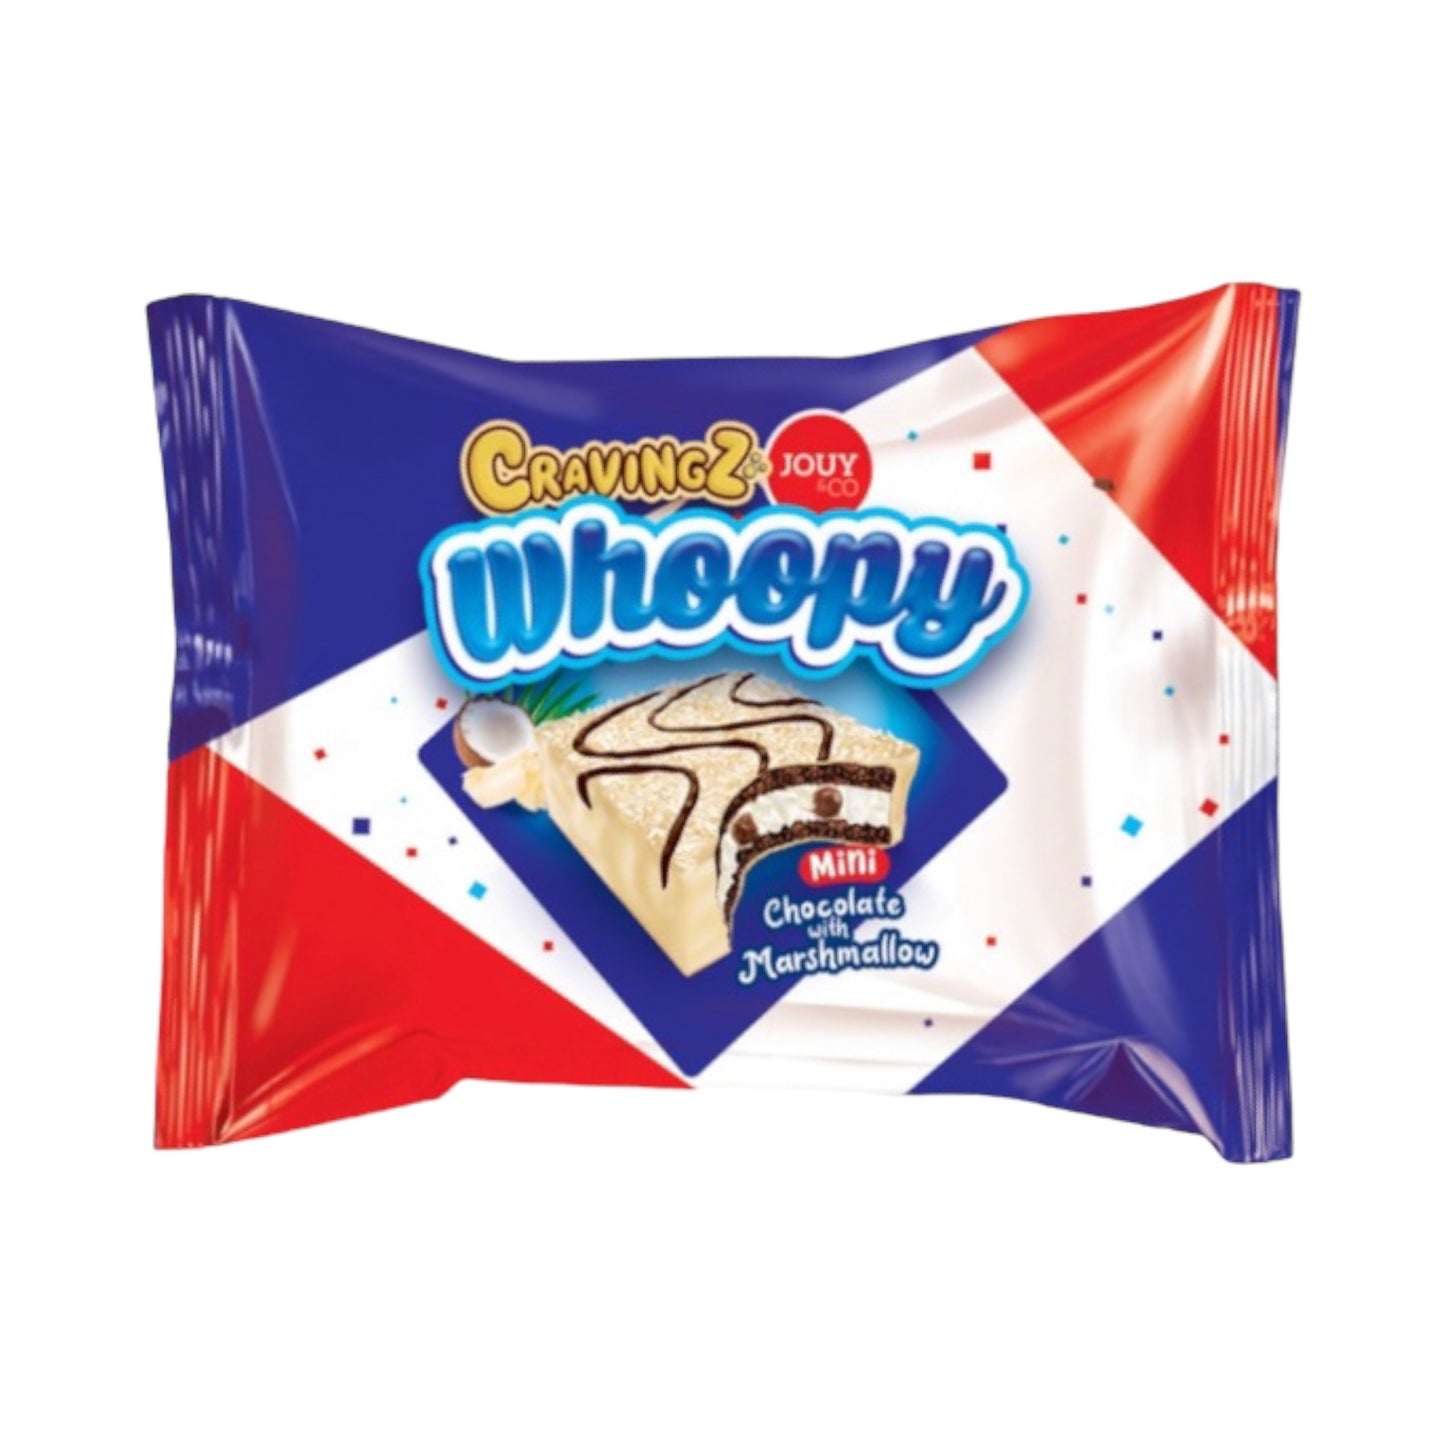 Cravingz Whoopy 25g